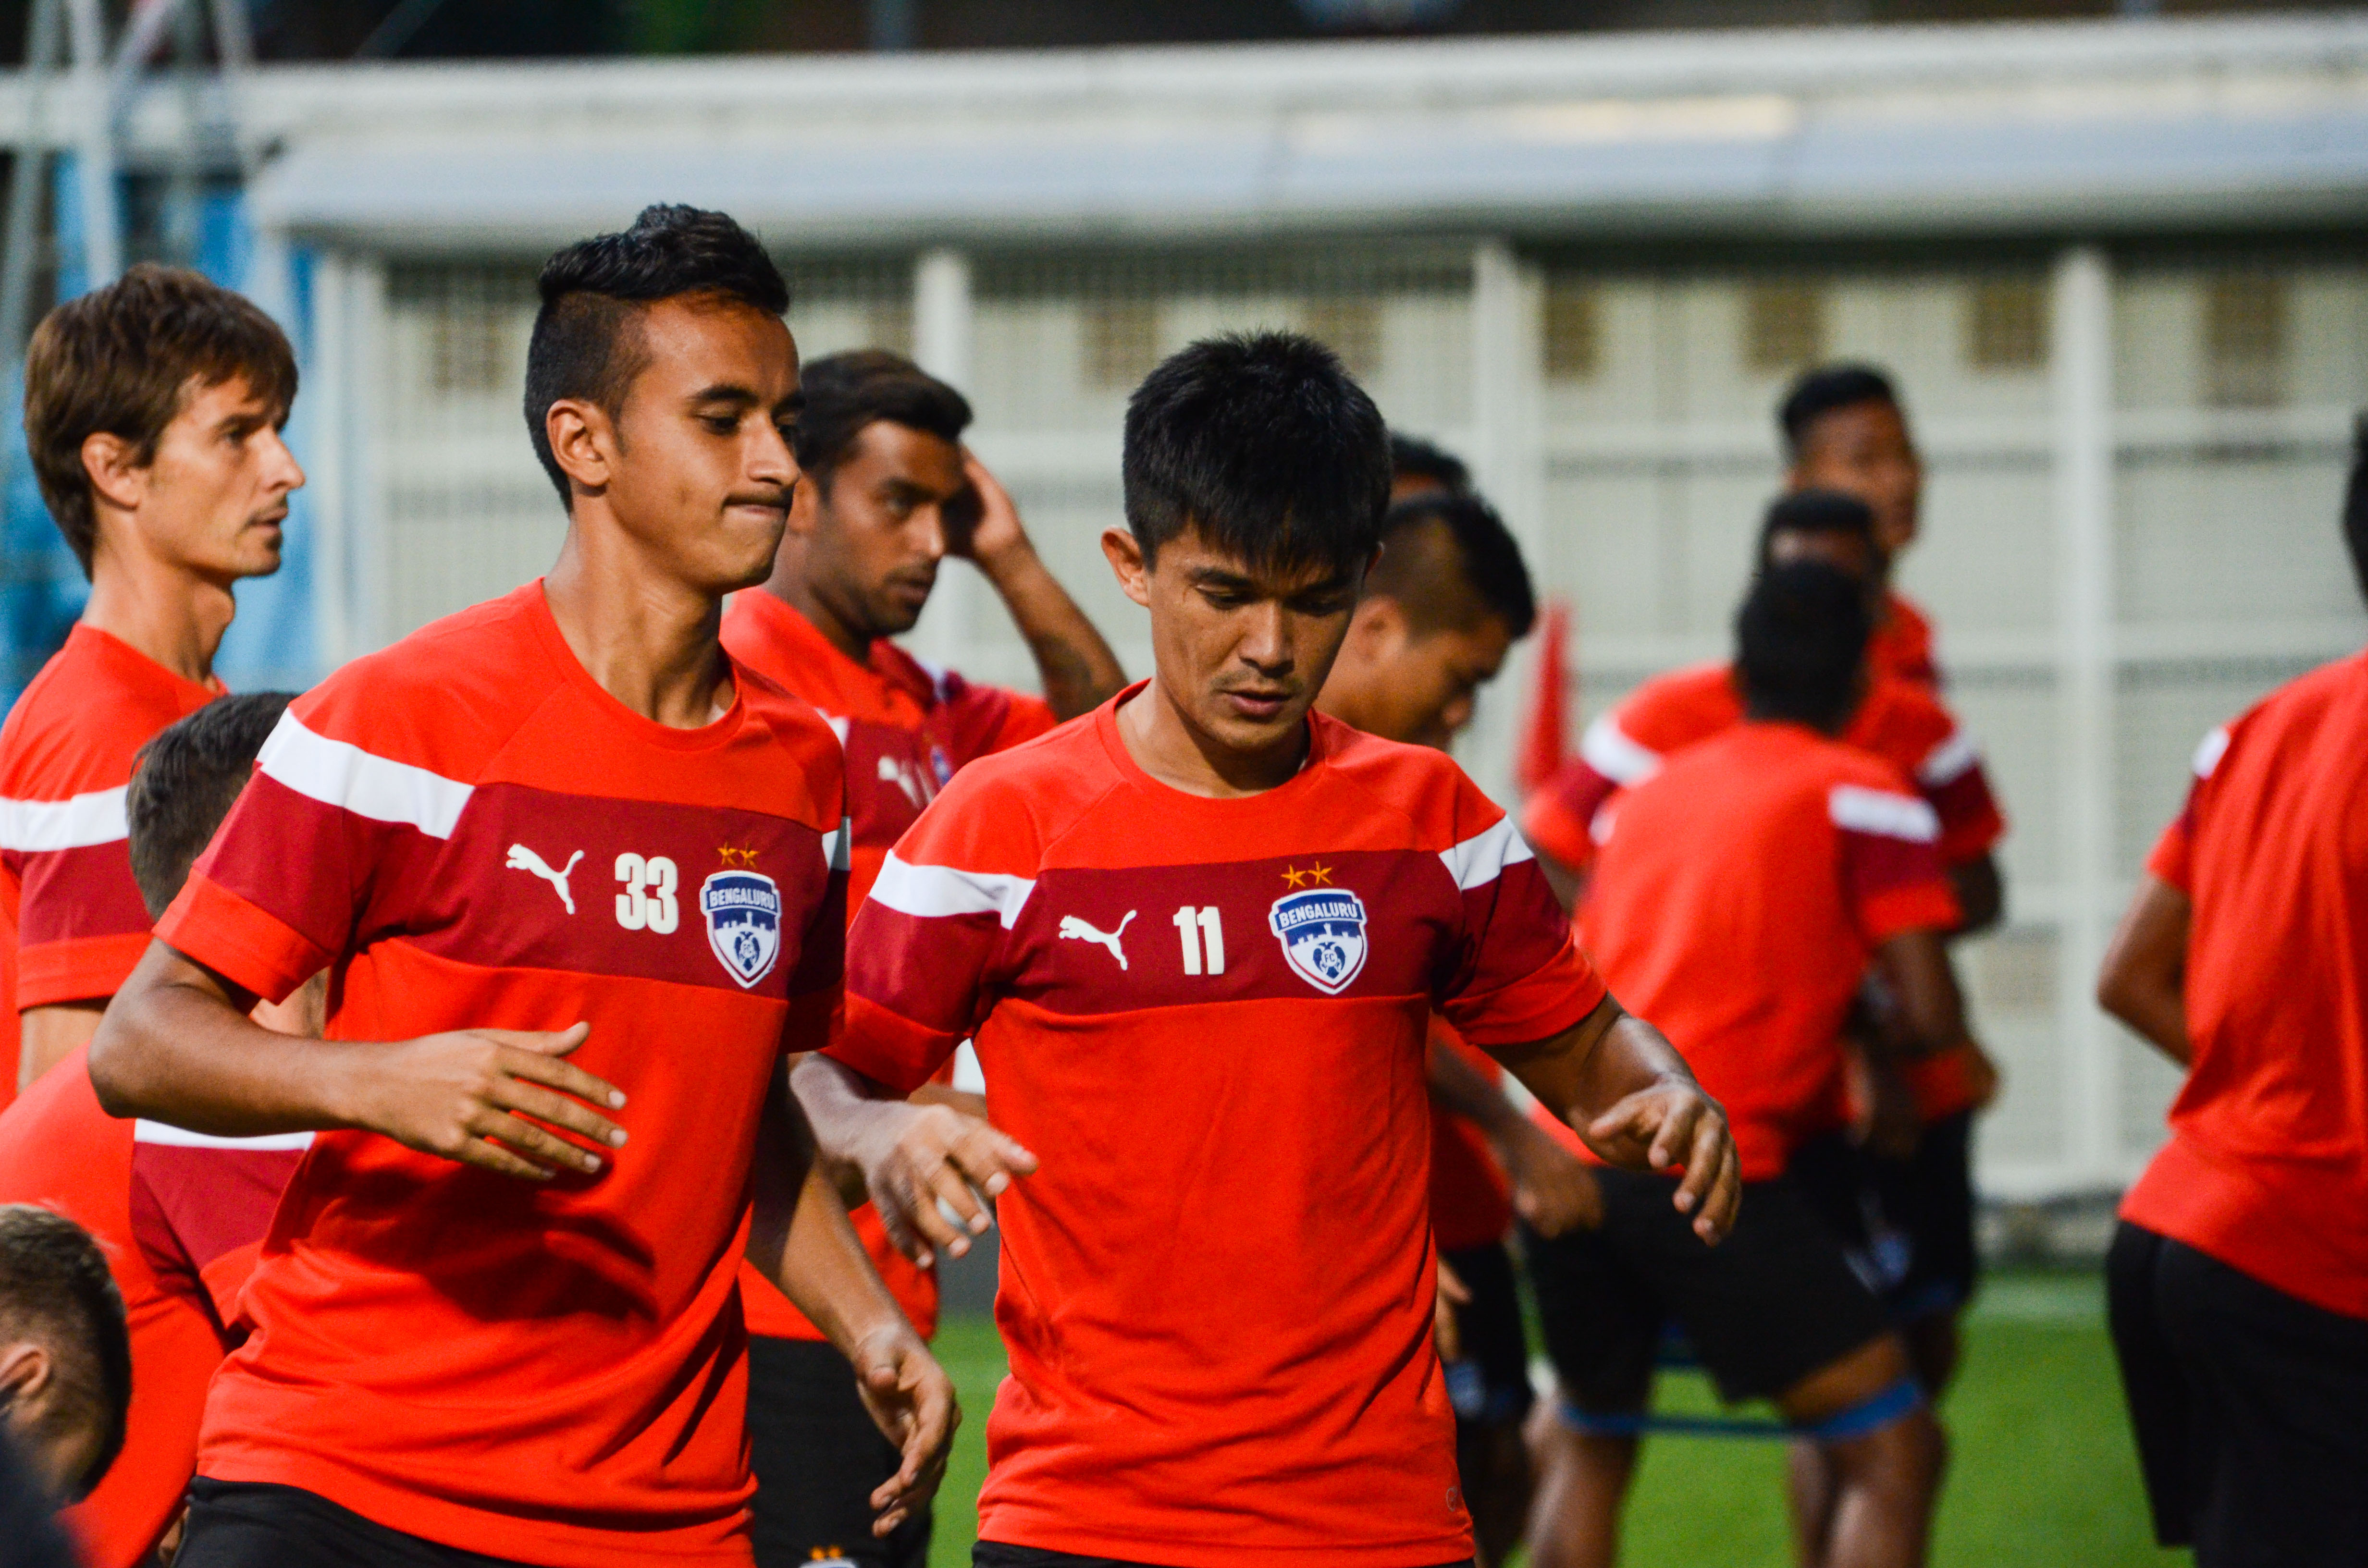 AFC Cup | Bengaluru FC's win means much more for Indian football than a semis spot